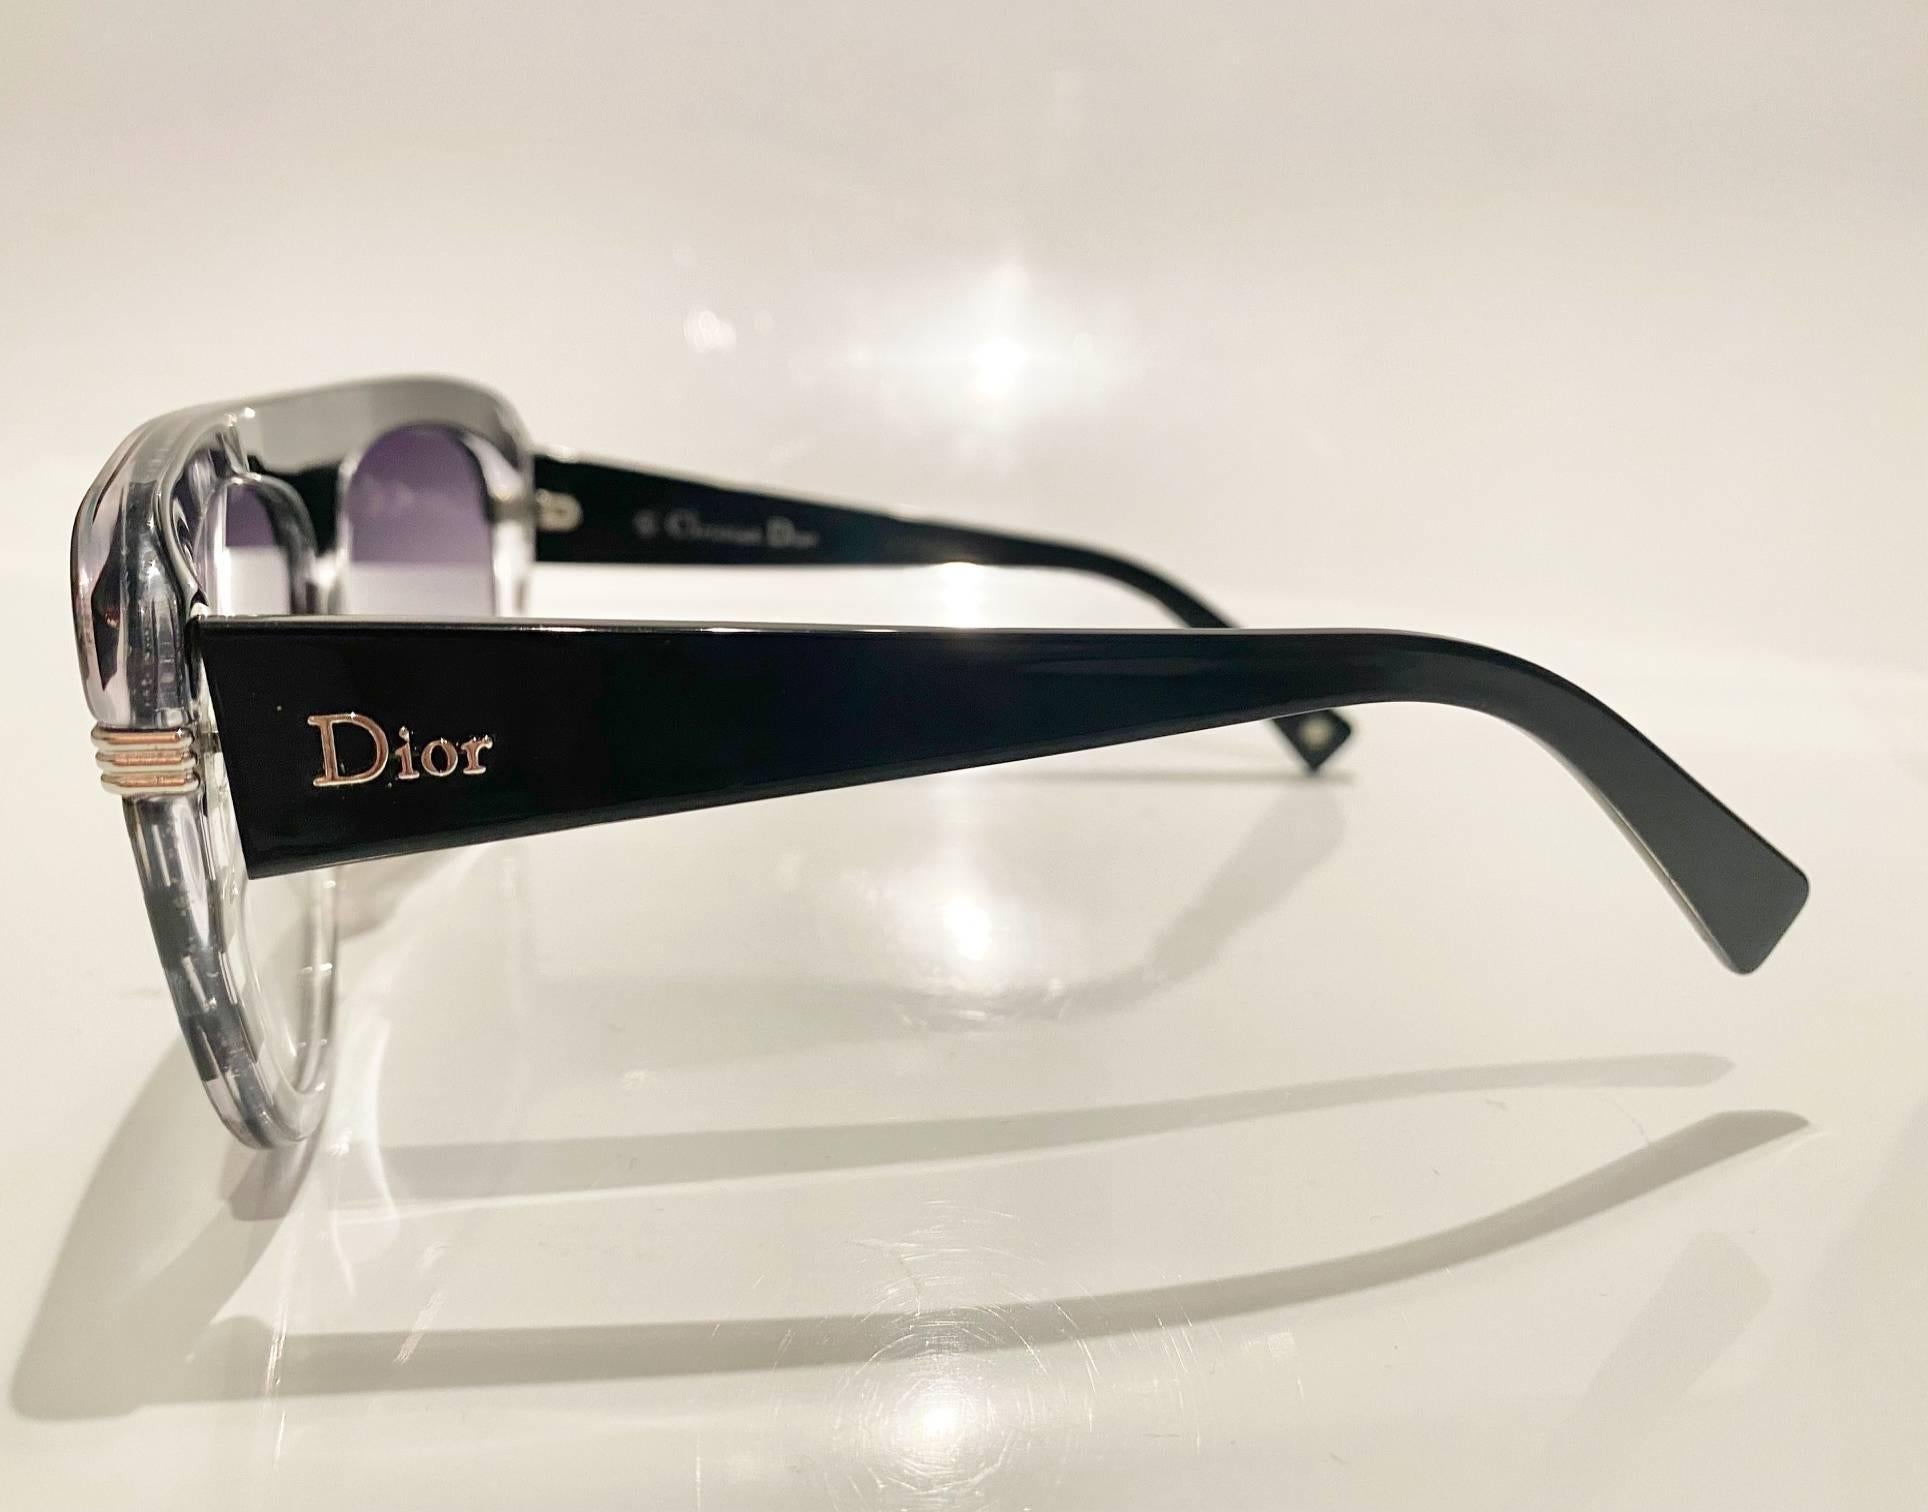 2000s Christian Dior Stripe Cat-Eye Sunglasses, dark blue stripe pattern Constructed of high-grade acetate, these sunglasses are designed to be both stylish and durable.

Condition: 2000s, vintage, excellent, lens in immaculate